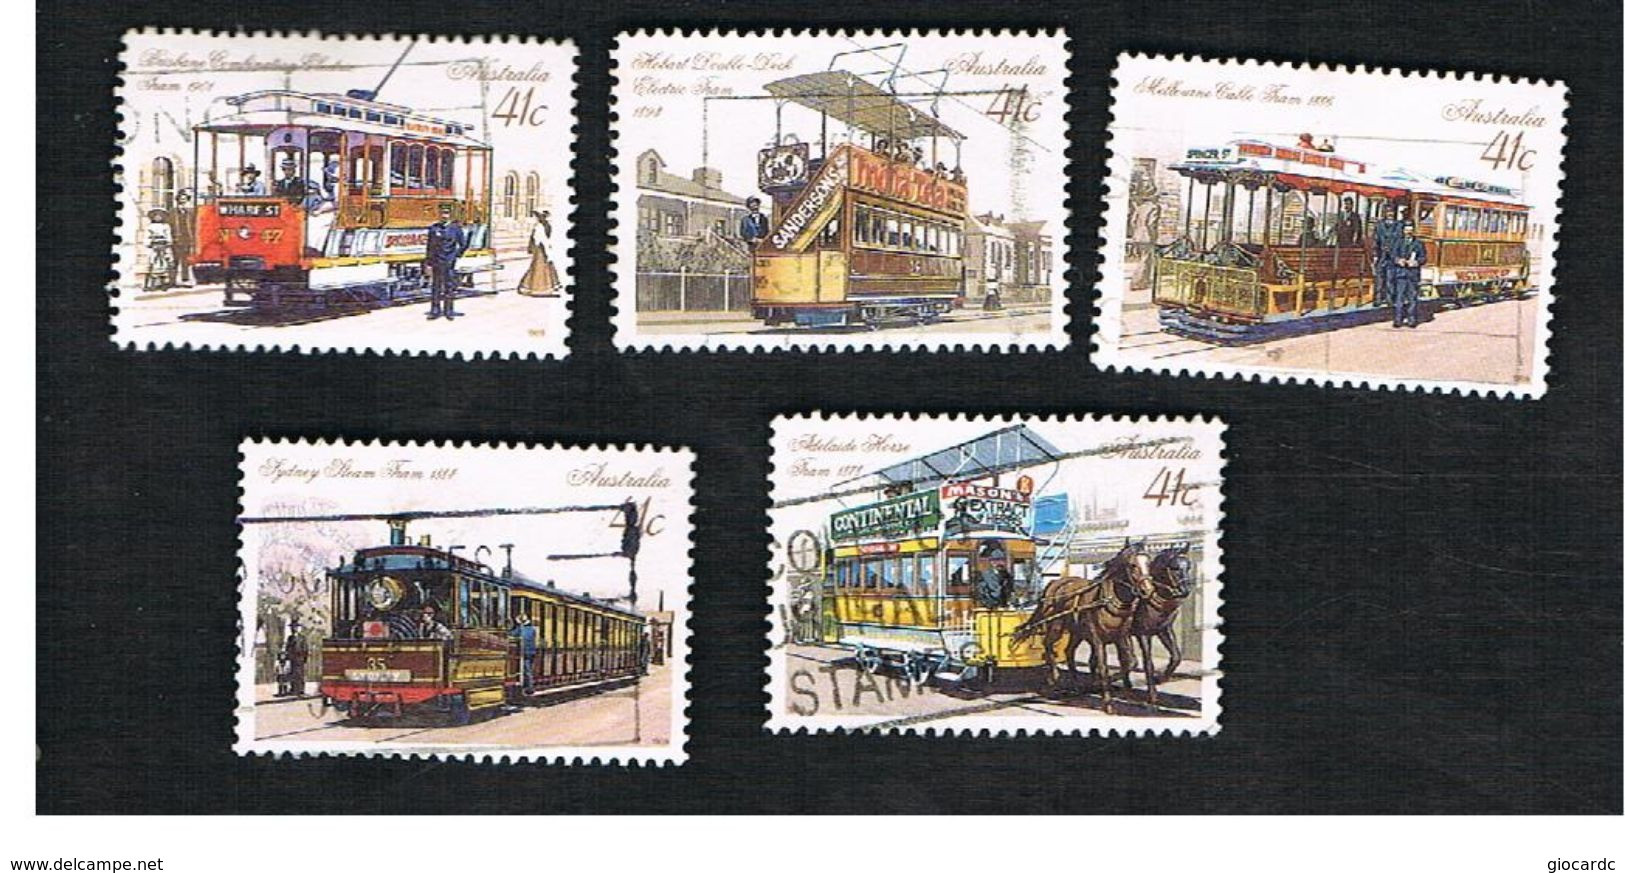 AUSTRALIA  -  SG 1220.1224    -      1989 TRAM: COMPLET SET OF 5       -       USED - Used Stamps